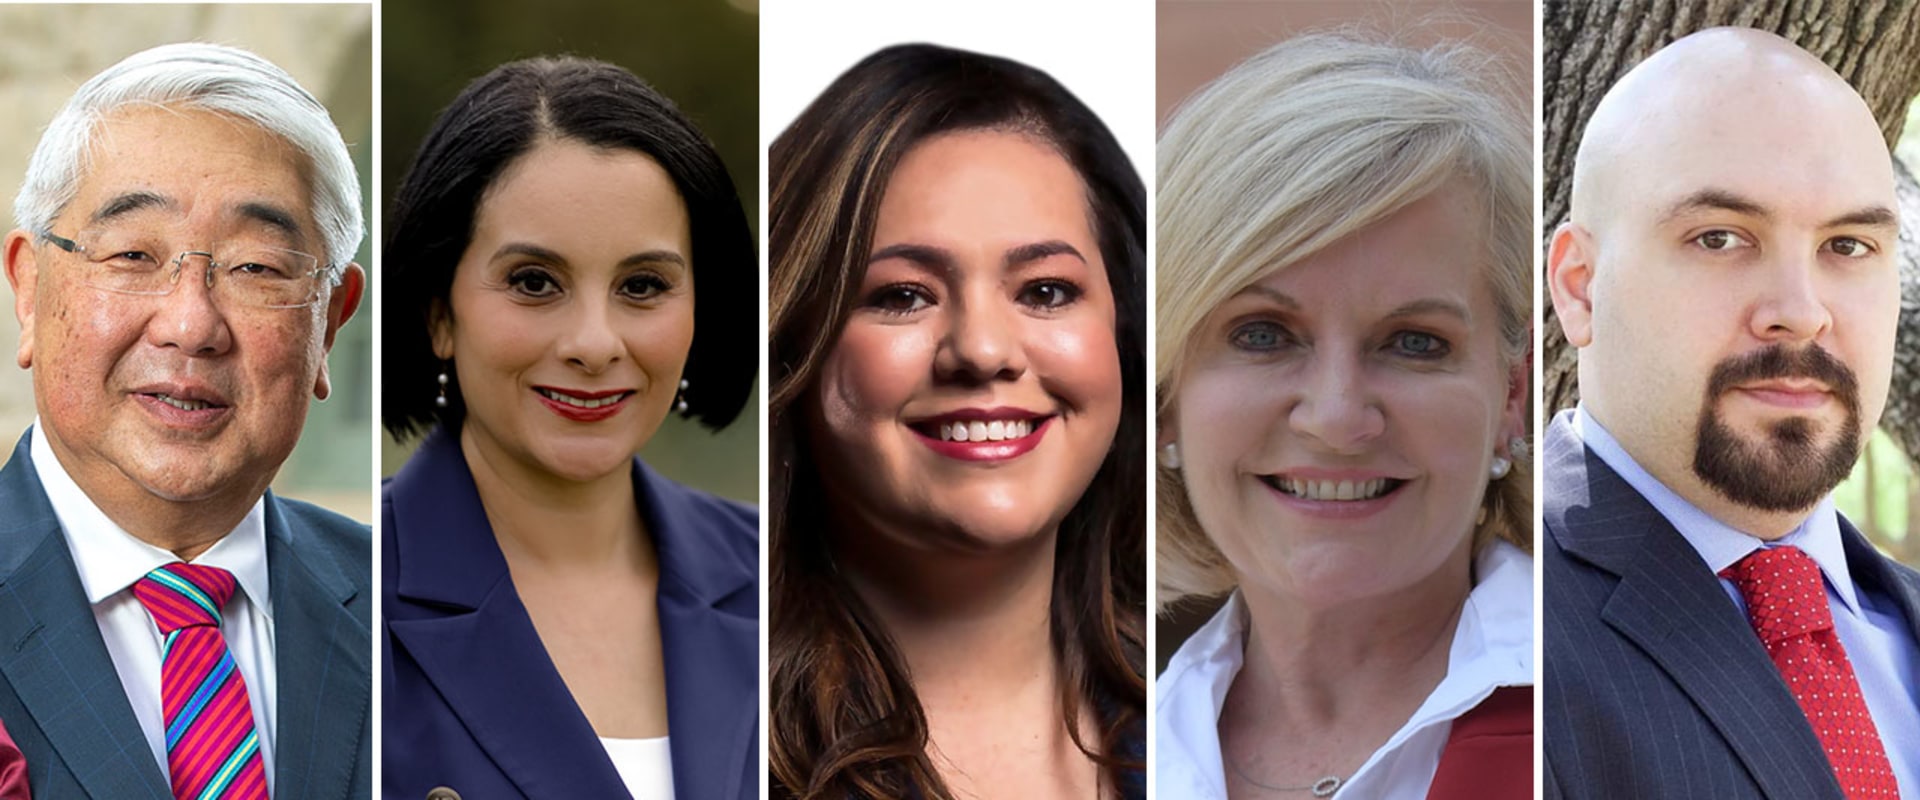 Who are the Most Prominent Candidates Running for Office in Bexar County Today?